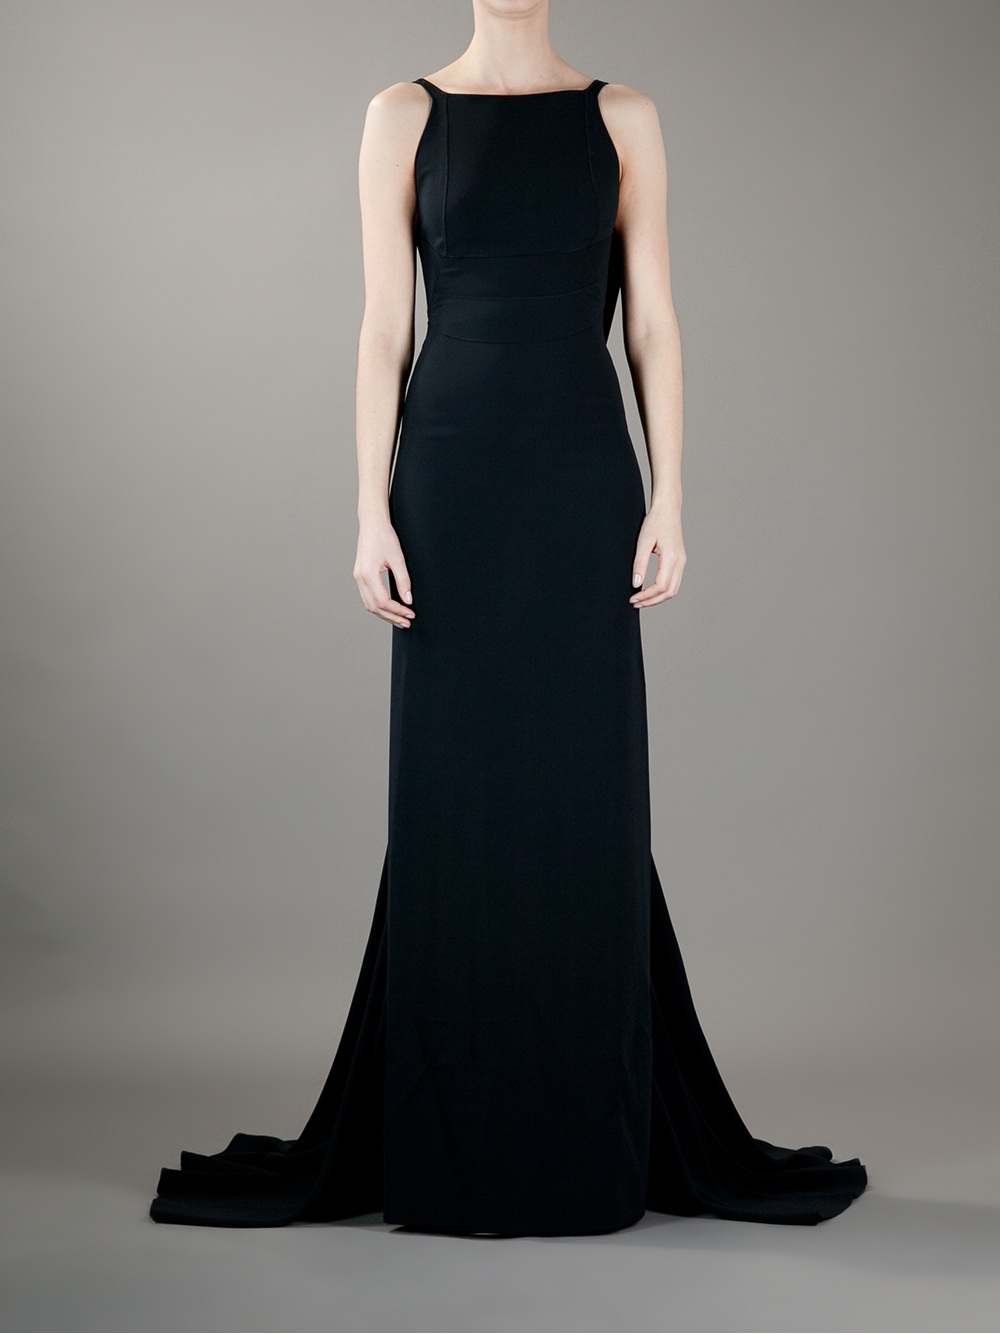 Lyst - Dsquared² Evening Dress in Black